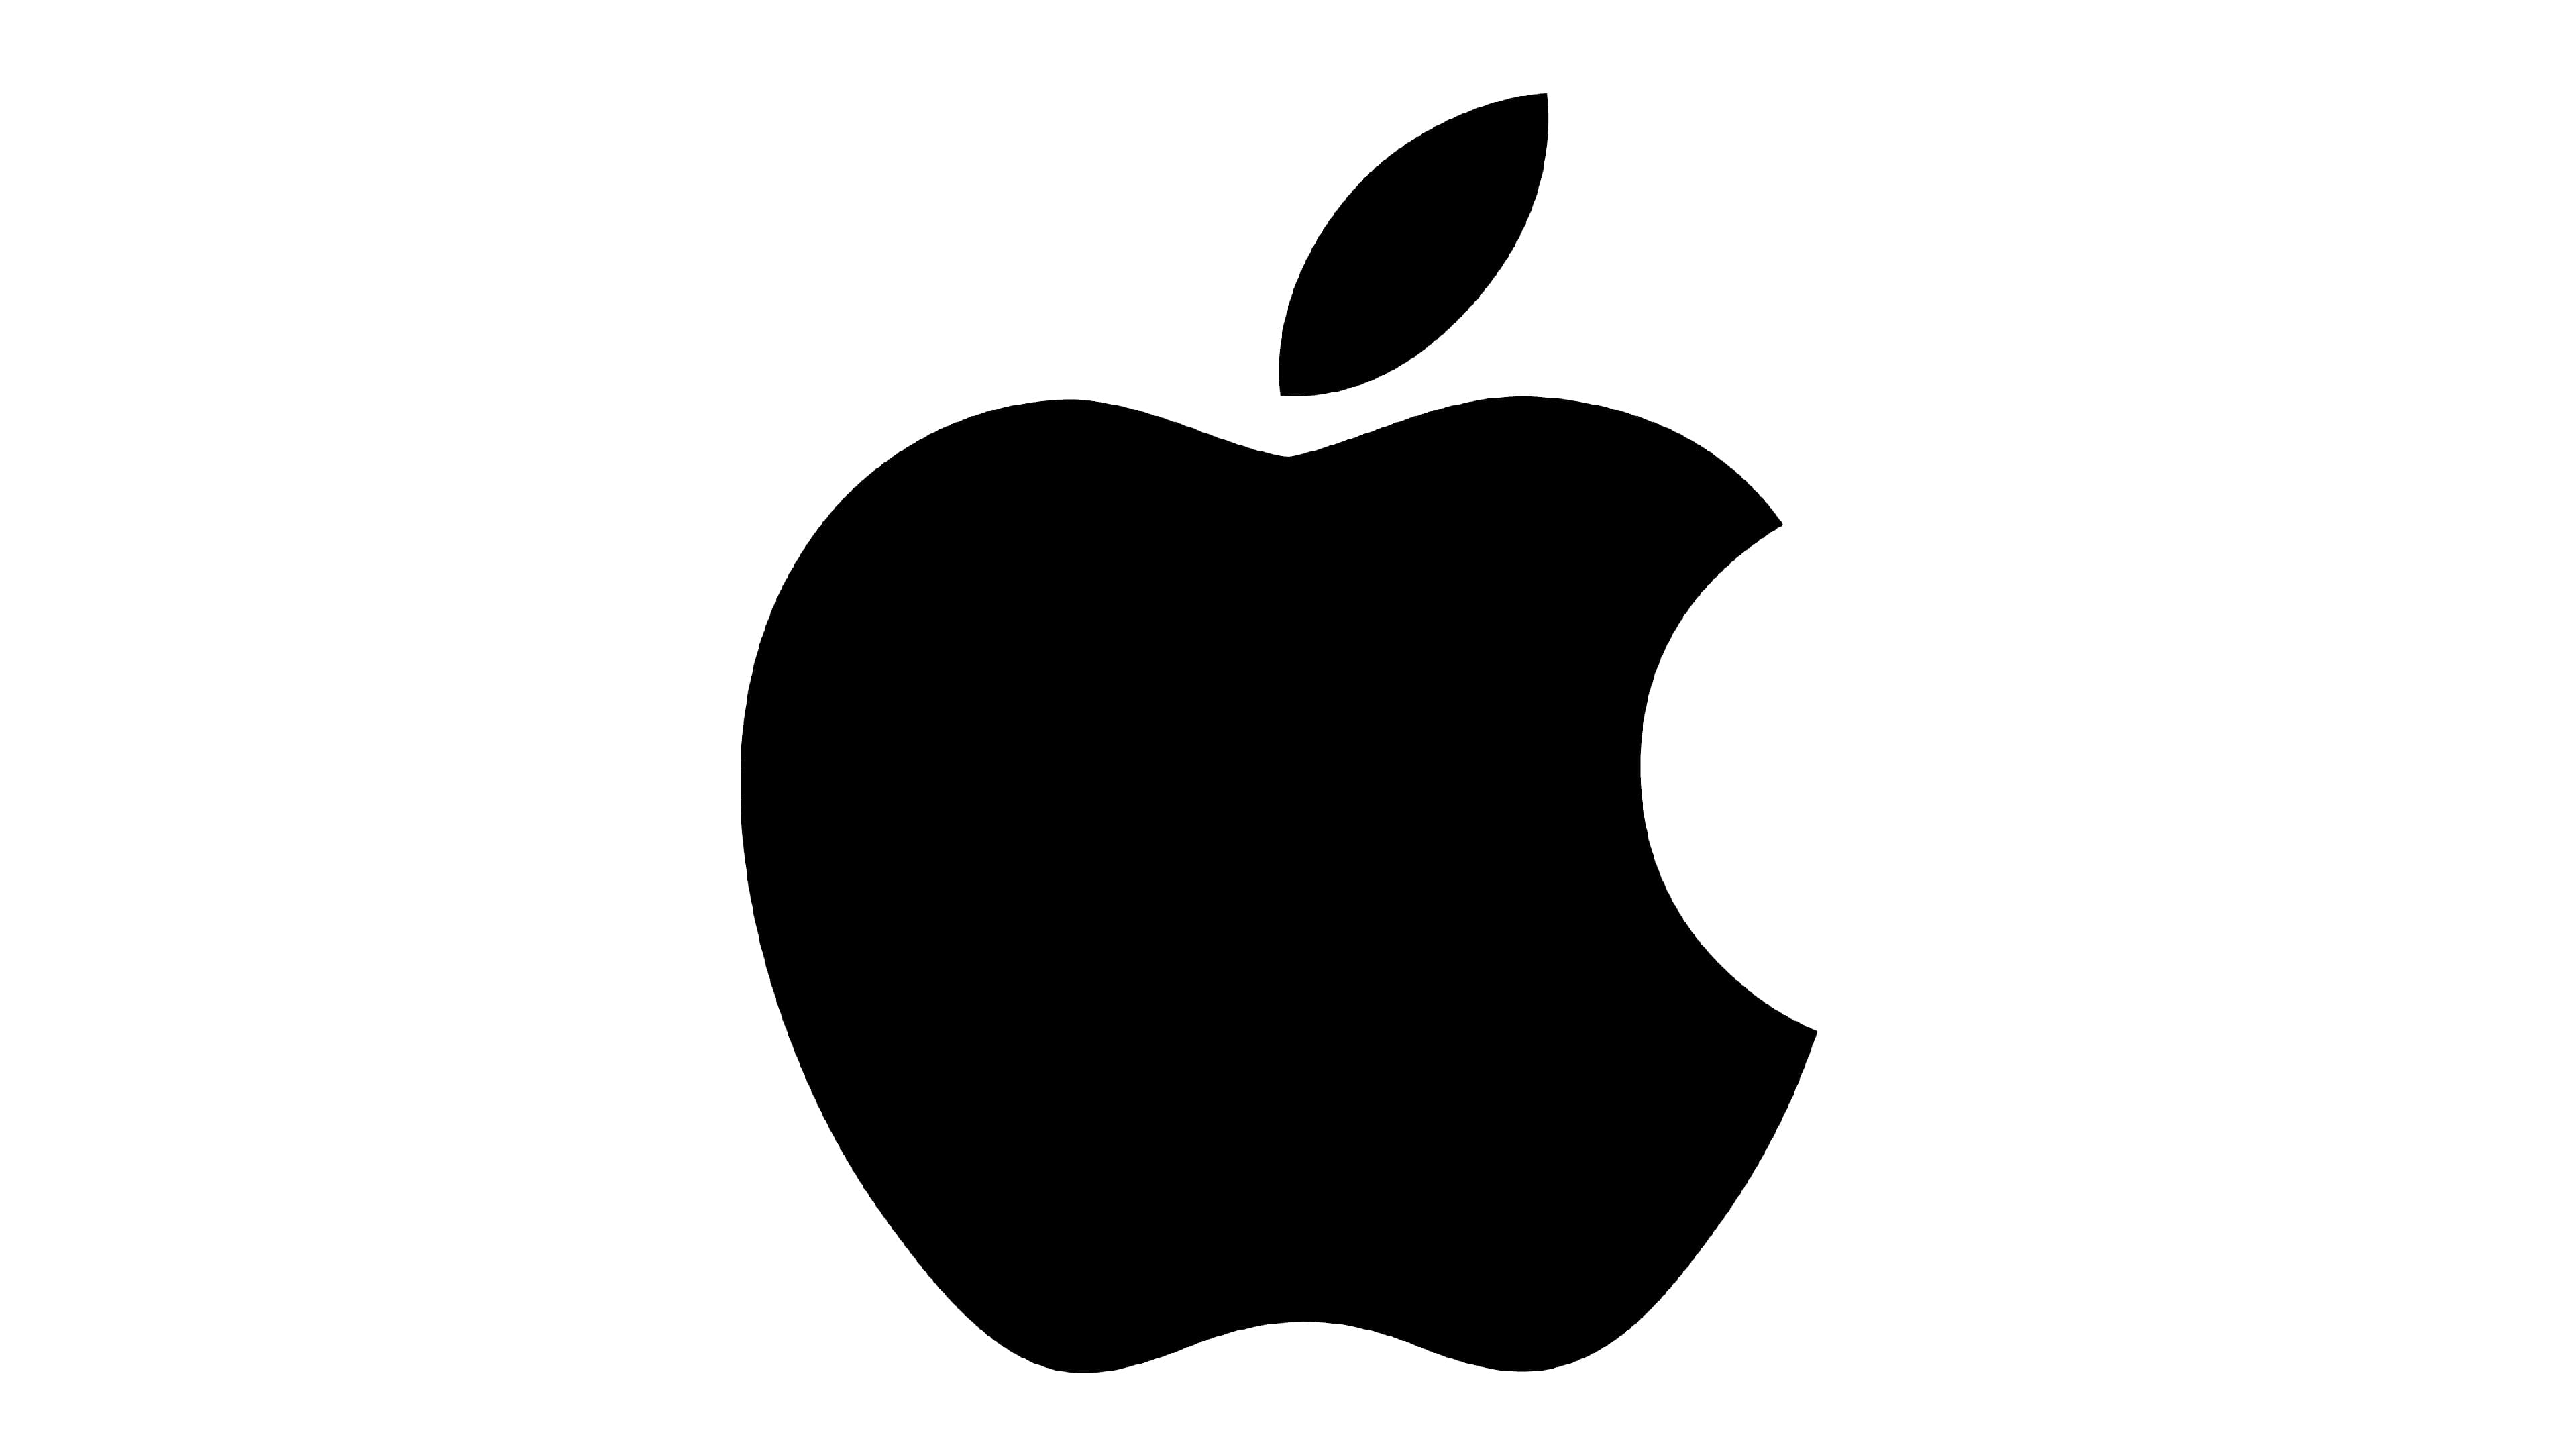 People Are Really Bad at Drawing the Apple Logo From Memory